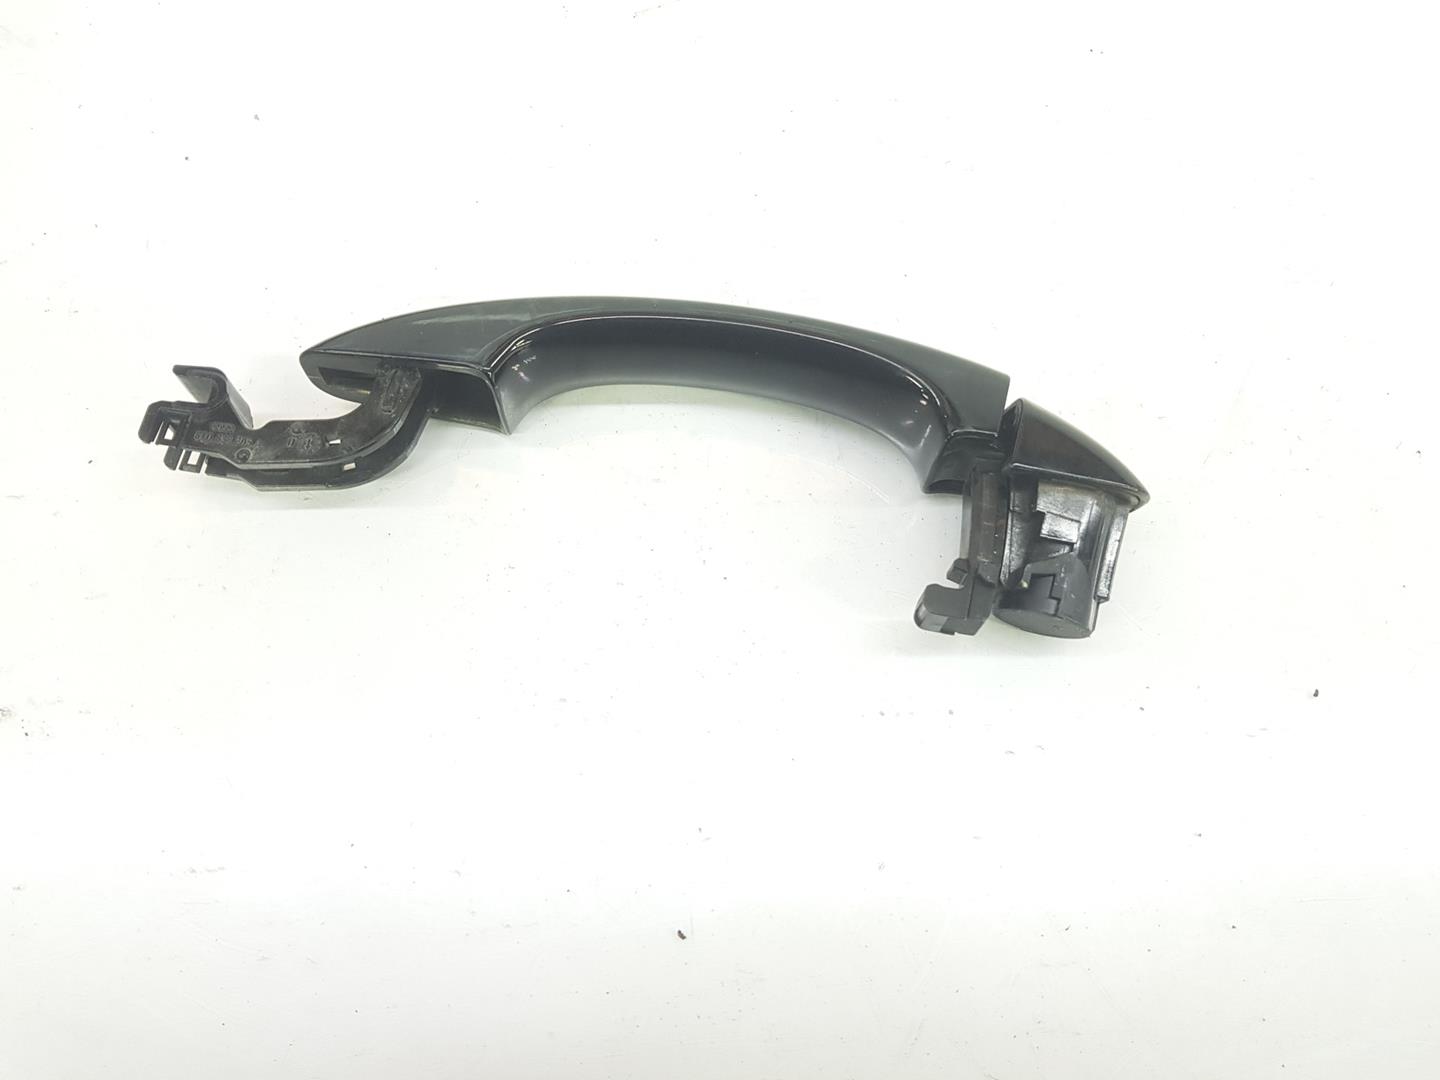 AUDI A5 Sportback B8 (2009-2015) Rear right door outer handle 8T0837205A, 8T0837211, COLORNEGROY9B2222DL 19773443